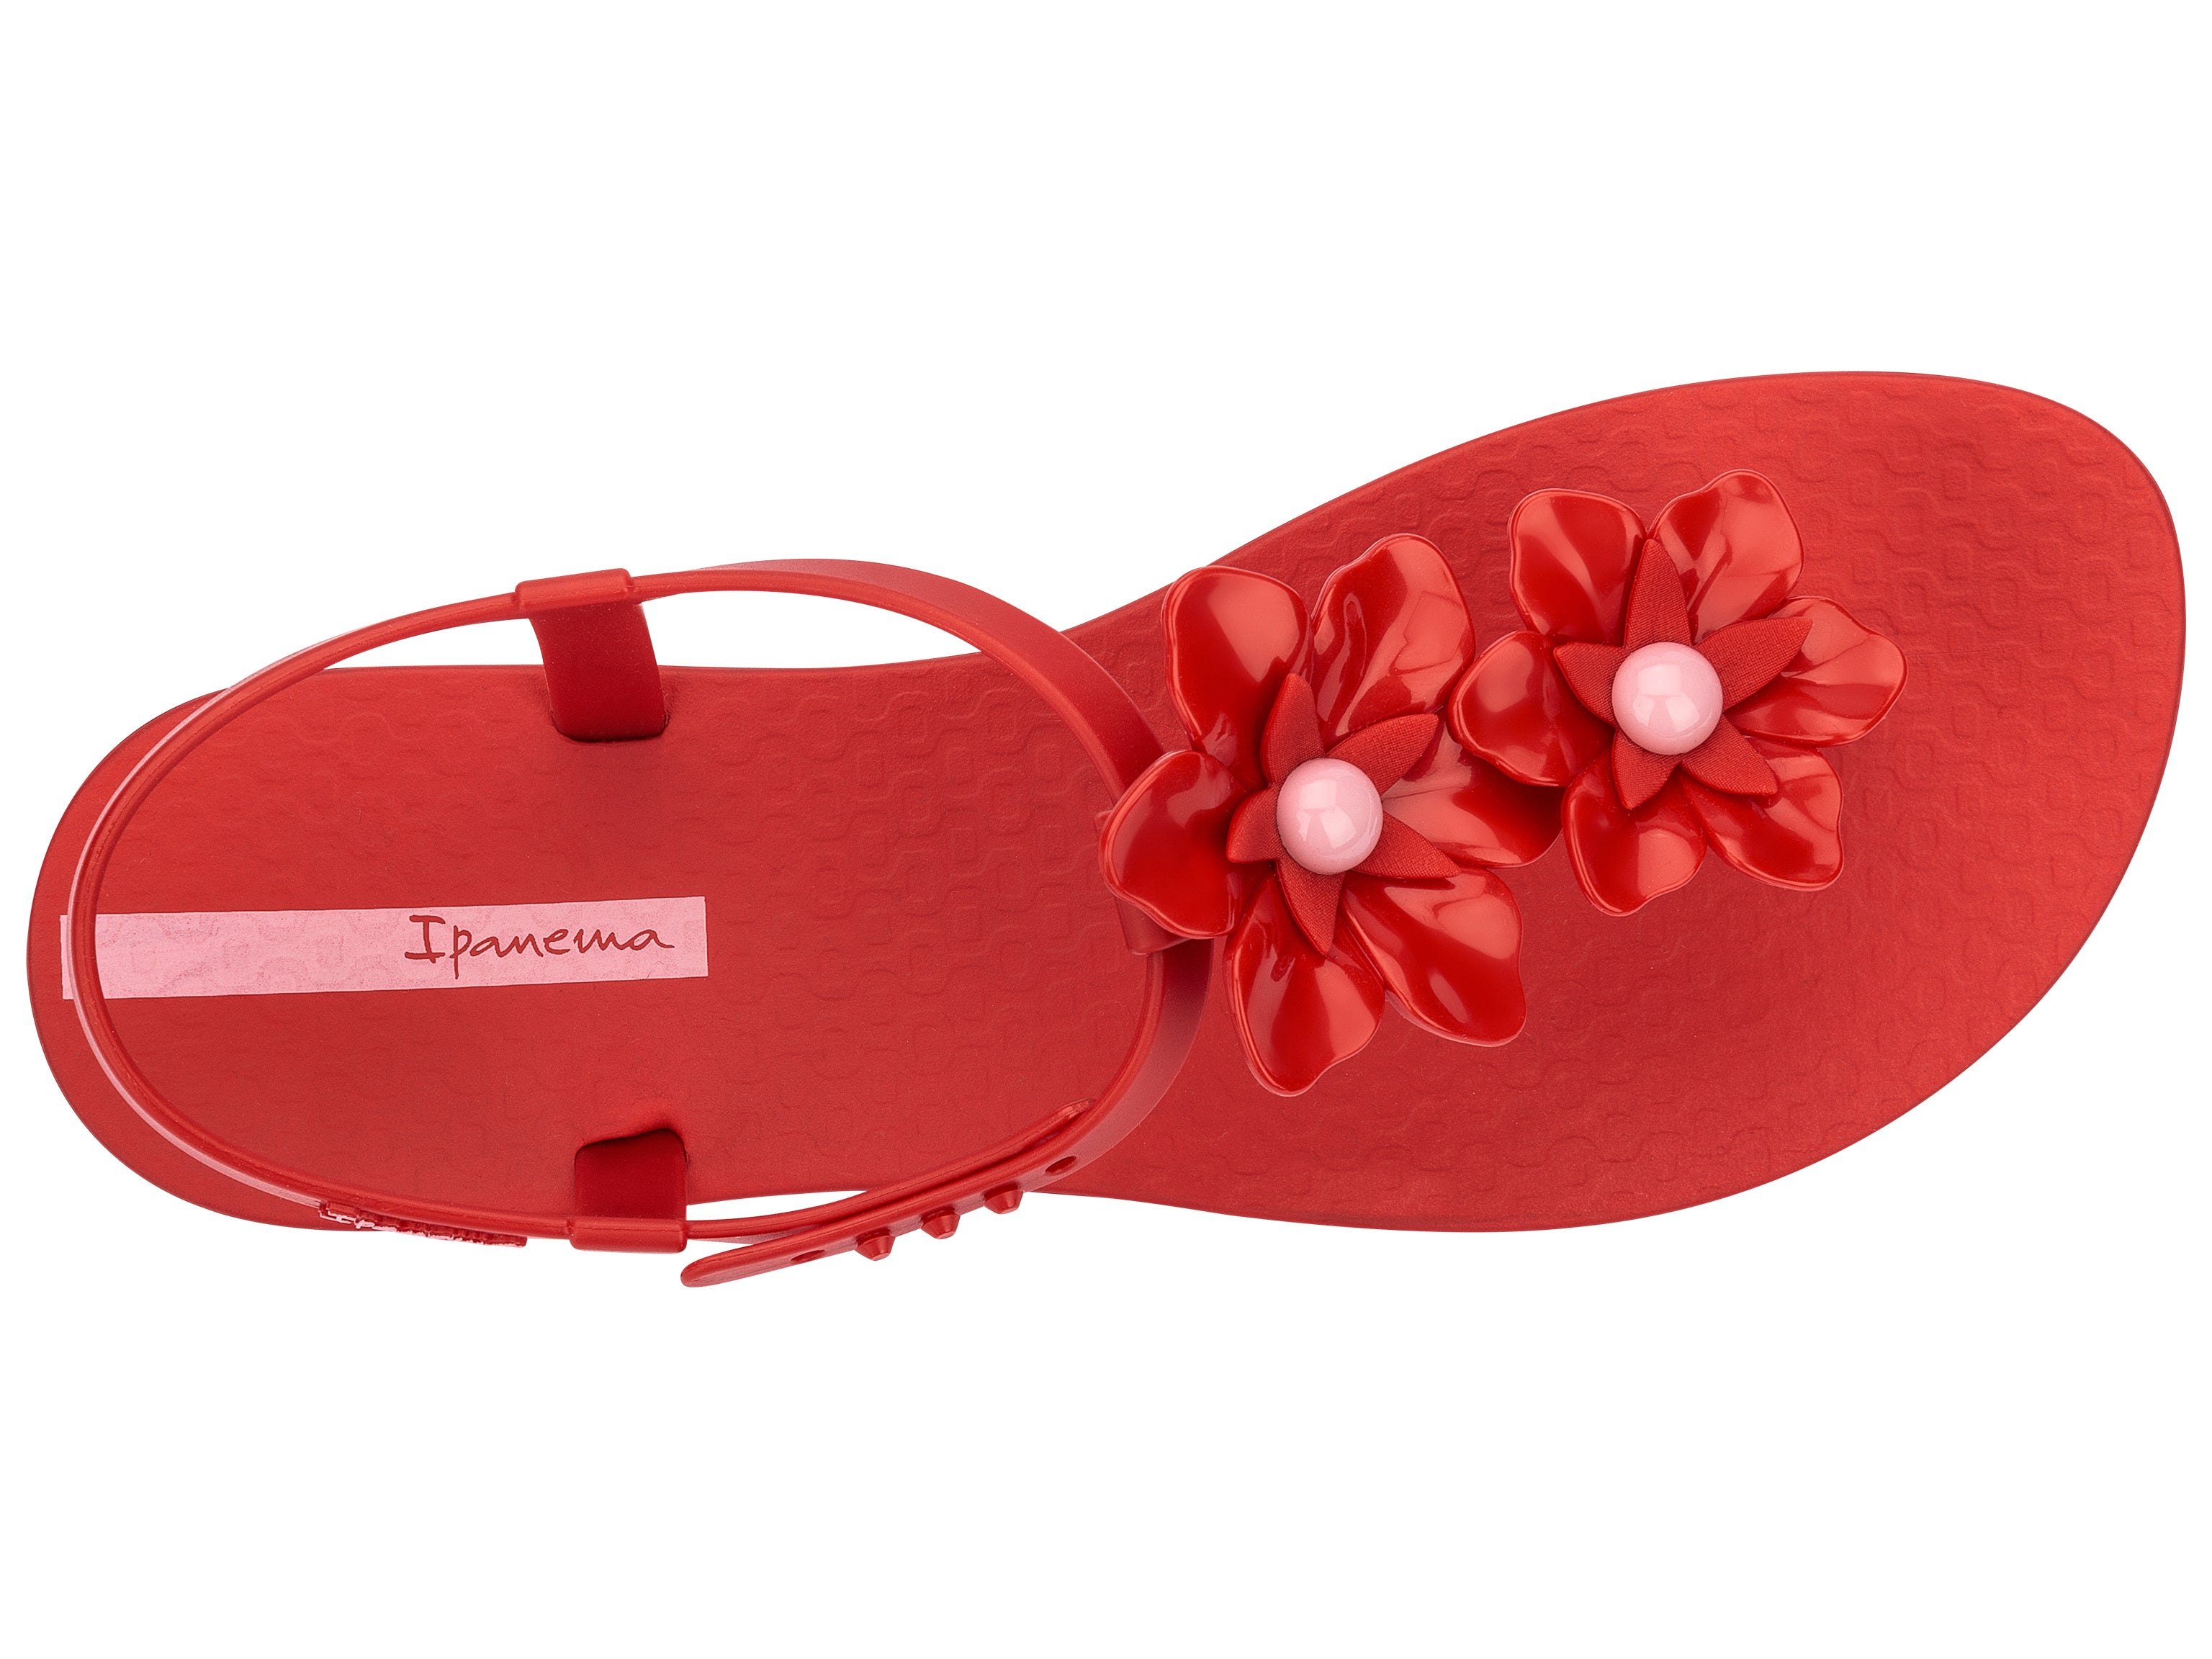 Top view of a Red Ipanema Duo Flowers women's t-strap sandal with two flowers.